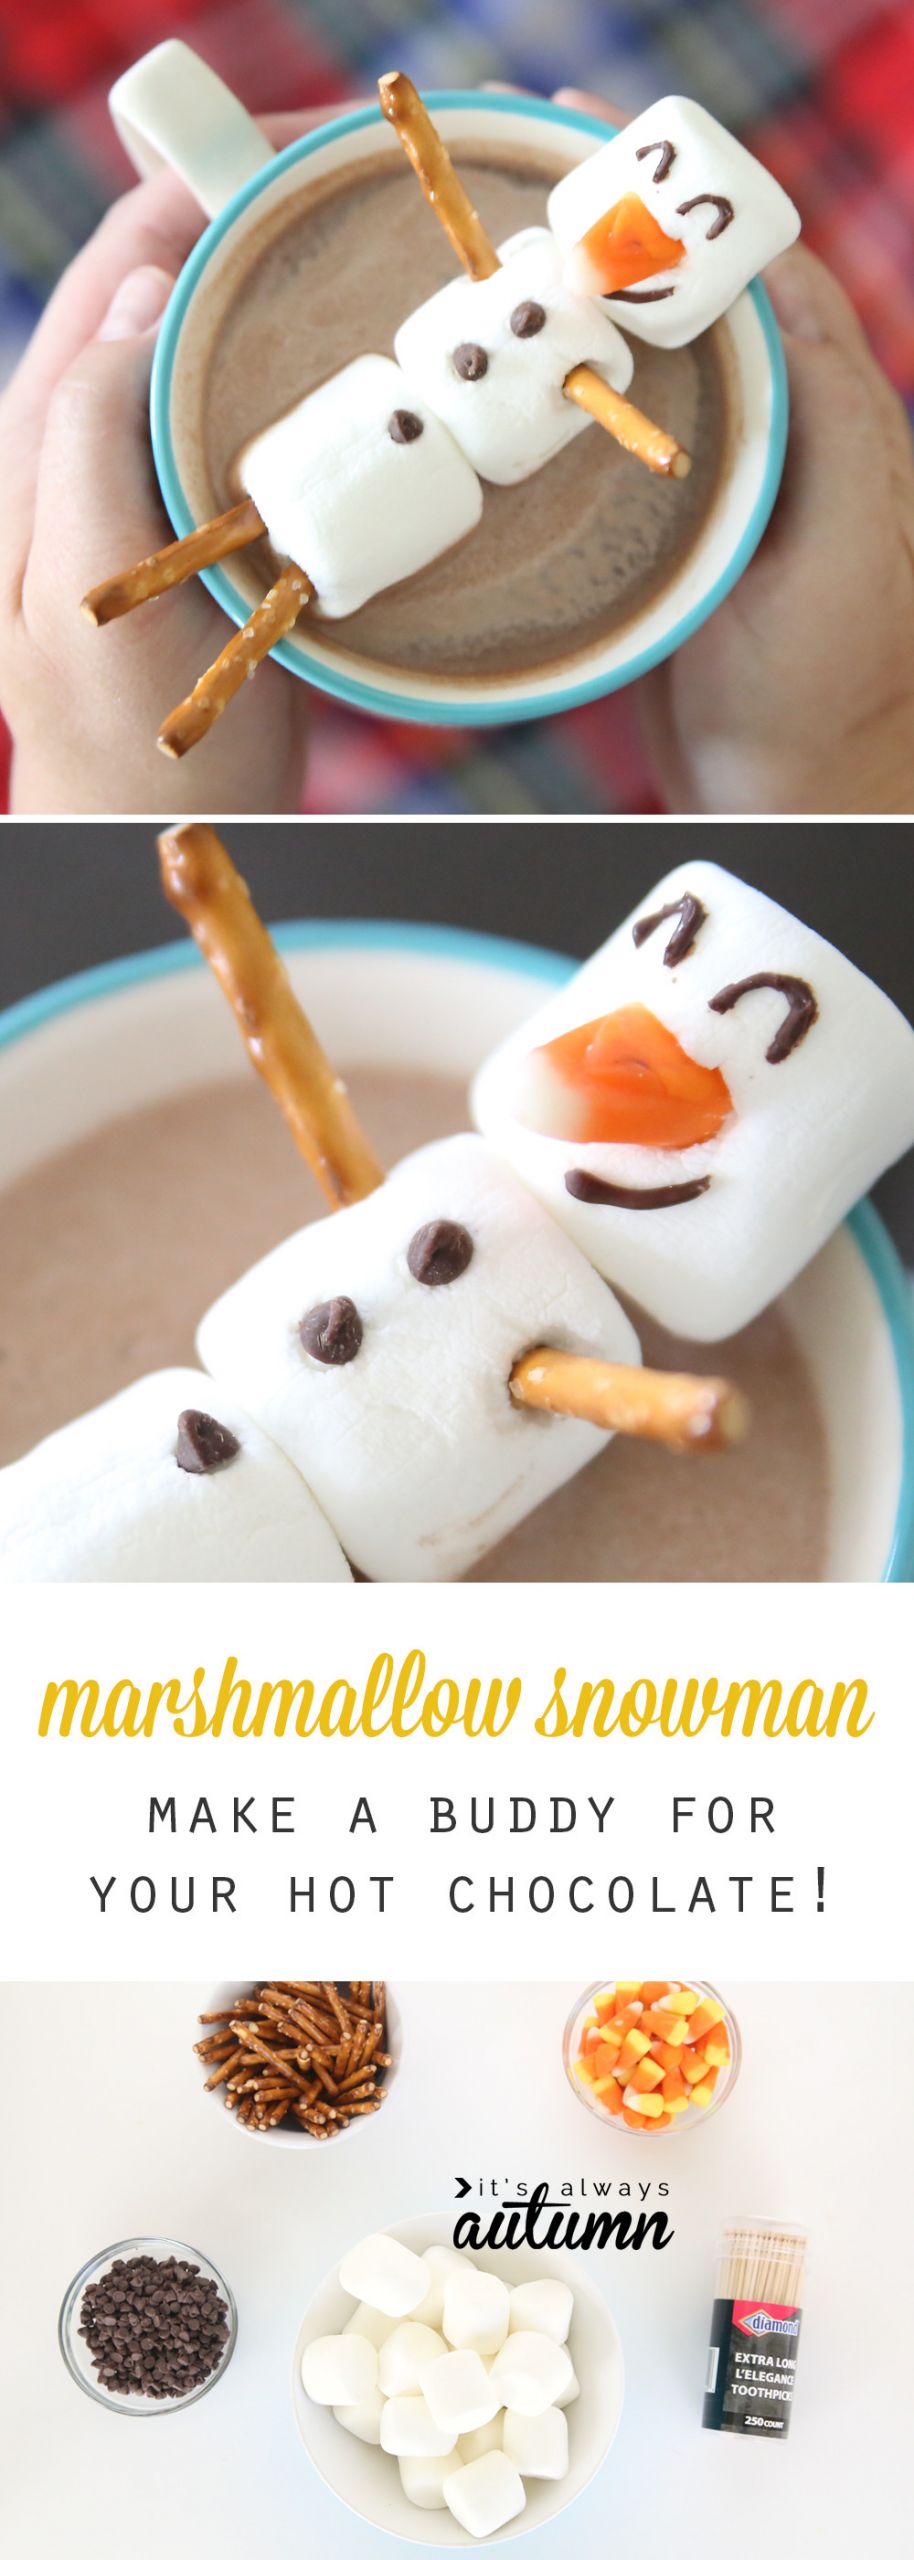 Winter Recipes For Kids
 Over 30 Winter Themed Fun Food Ideas and Easy Crafts Kids